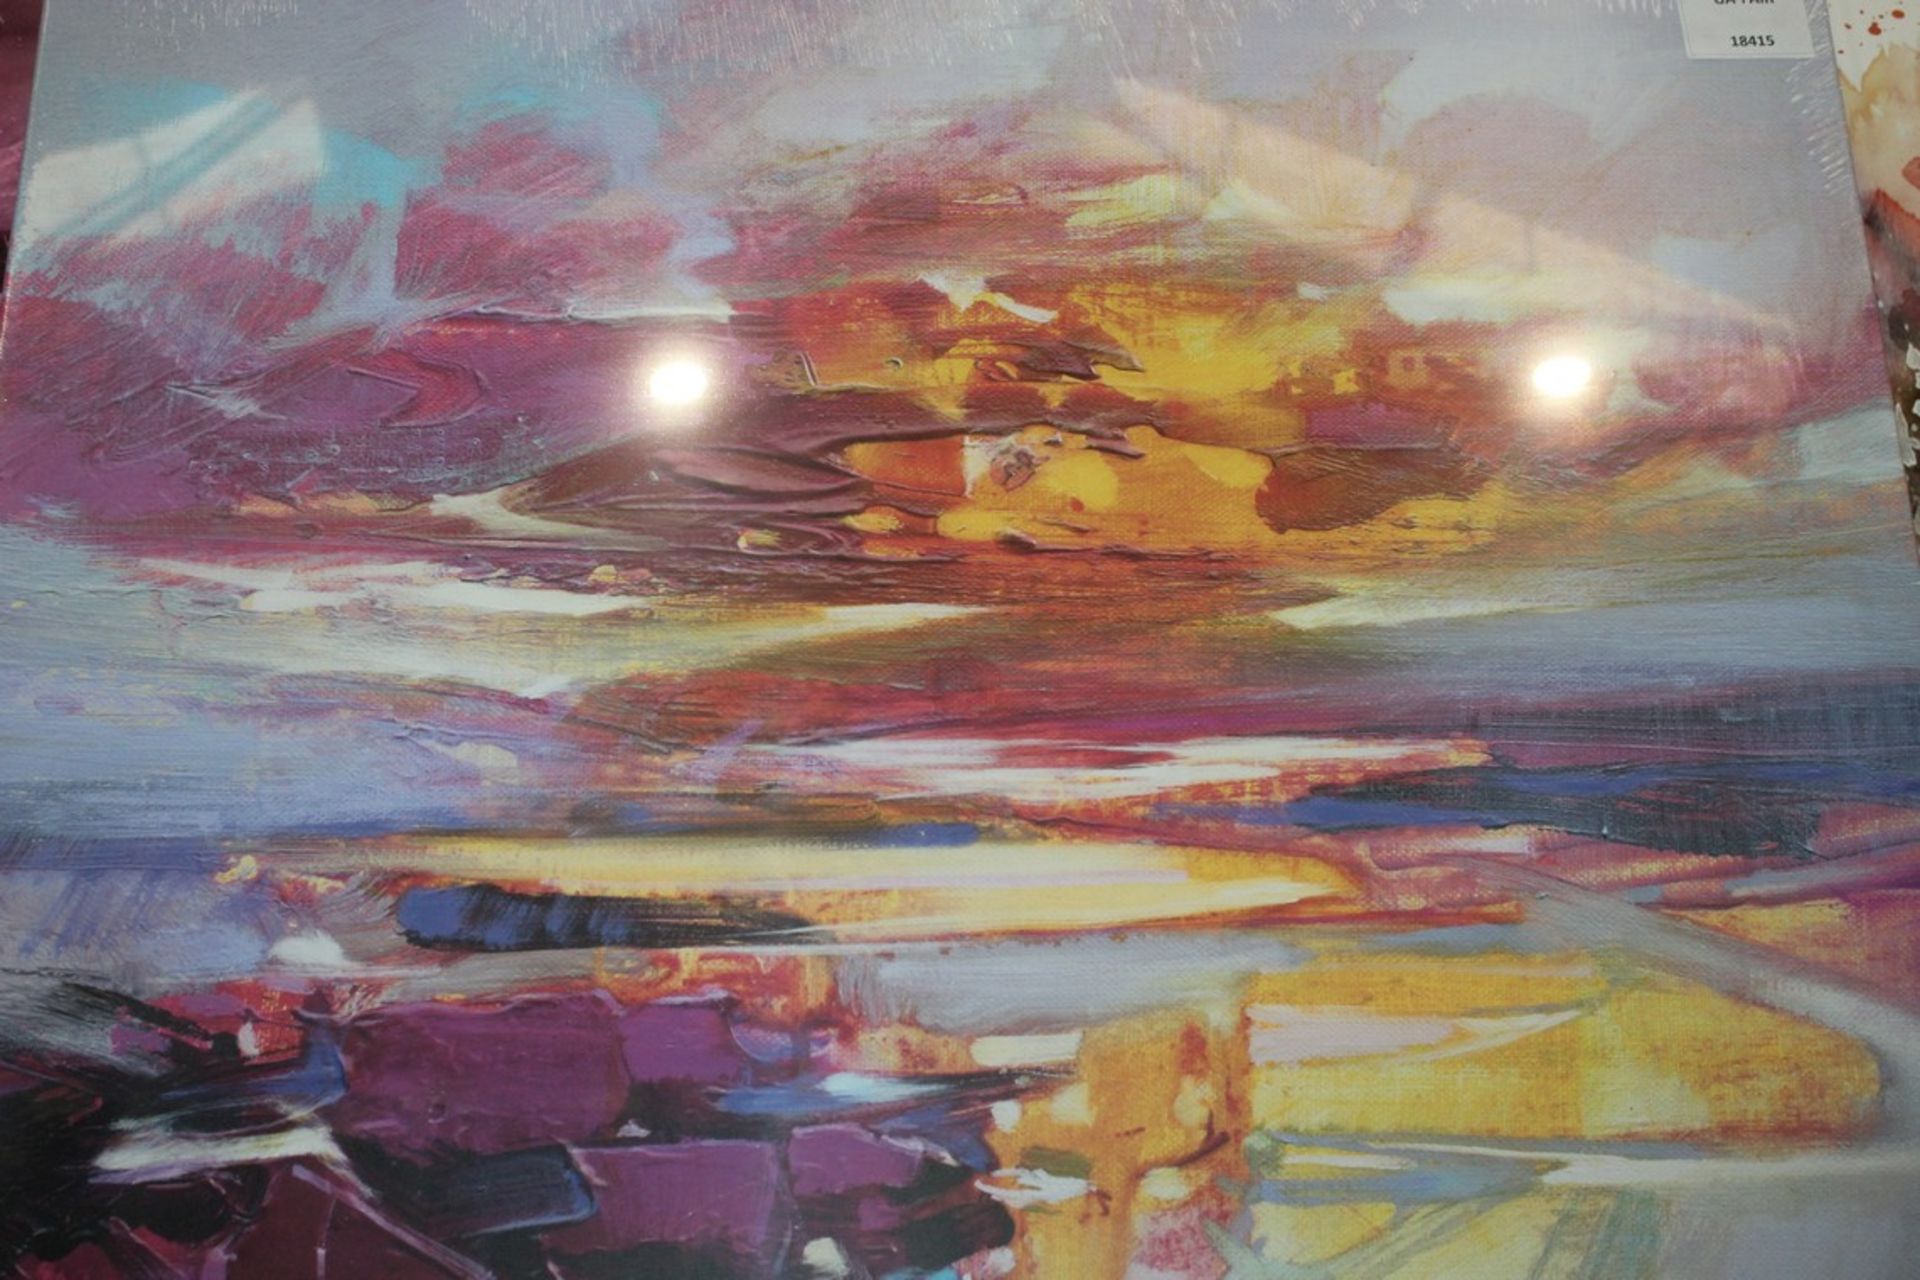 Ulst Causeways 2 Canvas By Scott Naismith RRP £75 (18415) (Pictures Are For Illustration Purposes